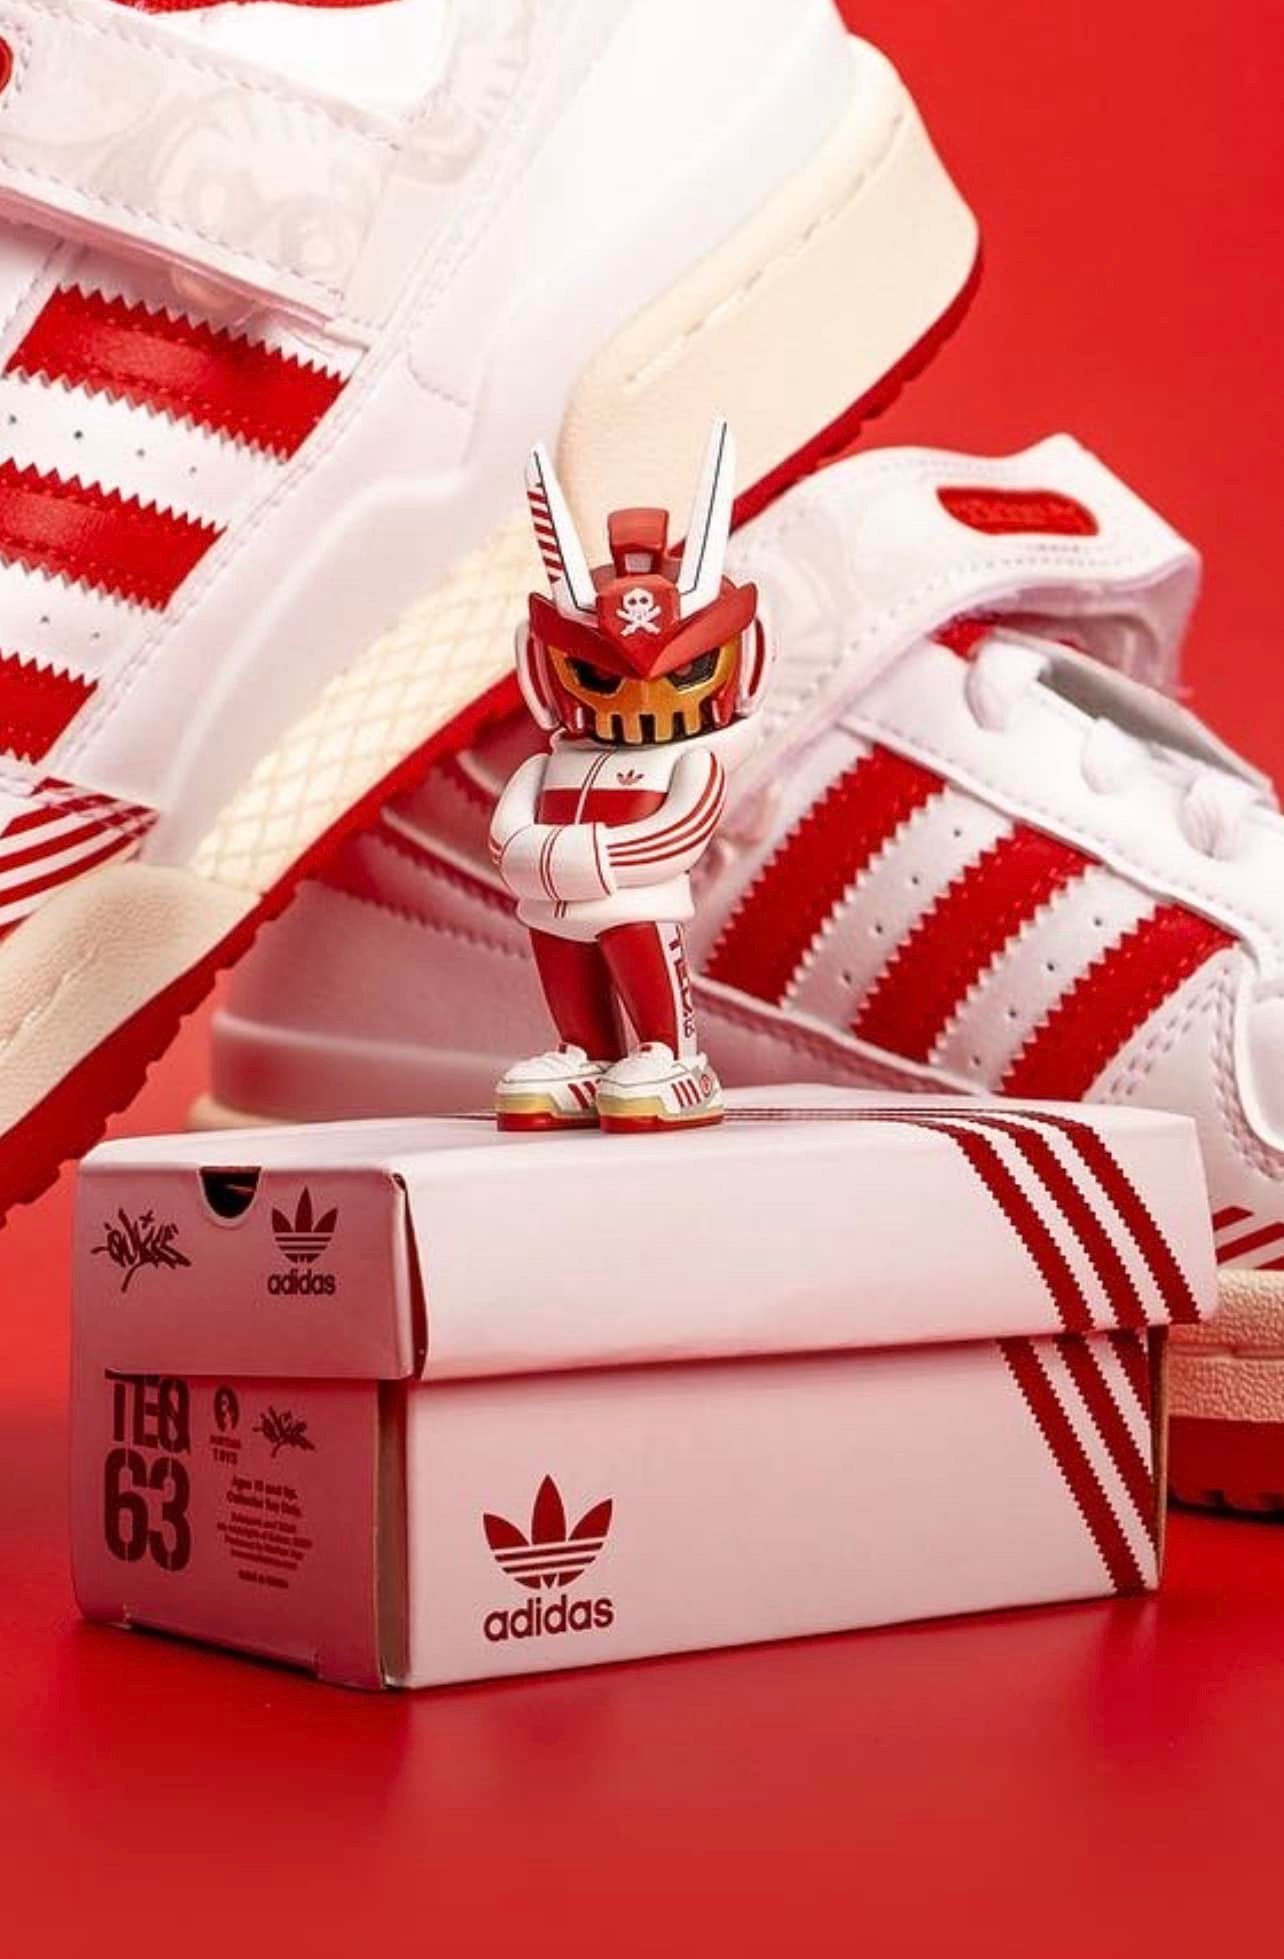 Stripes quiccs adidas Earned MicroTEQ by Quiccs x AdidasPH - The Toy Chronicle